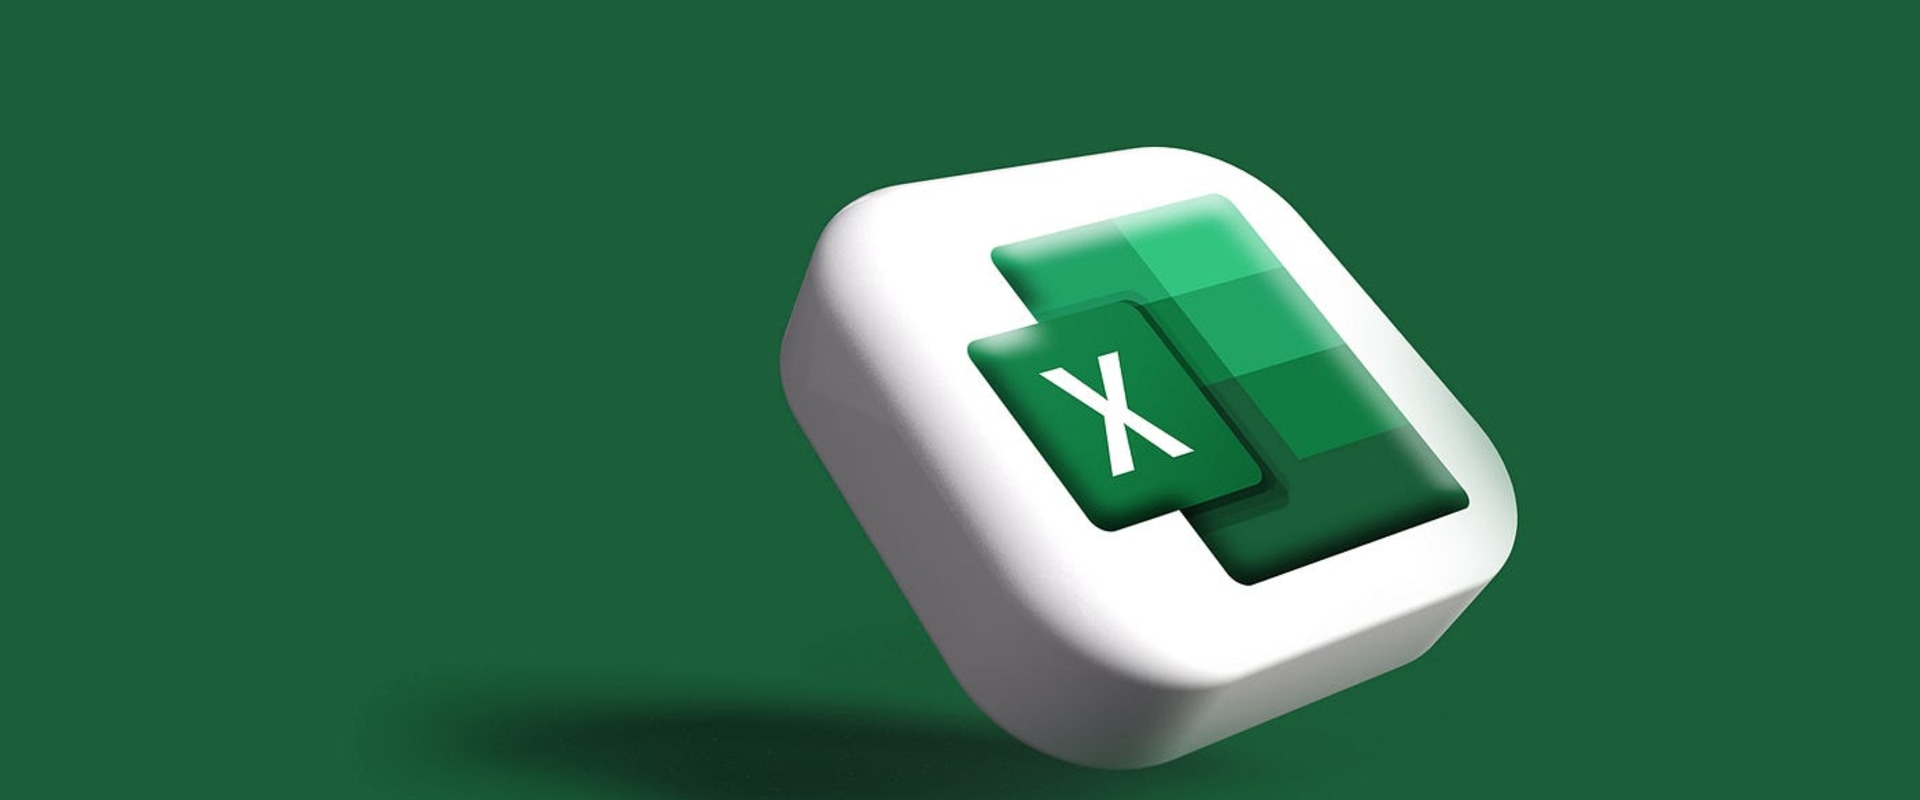 Is excel a data tool?